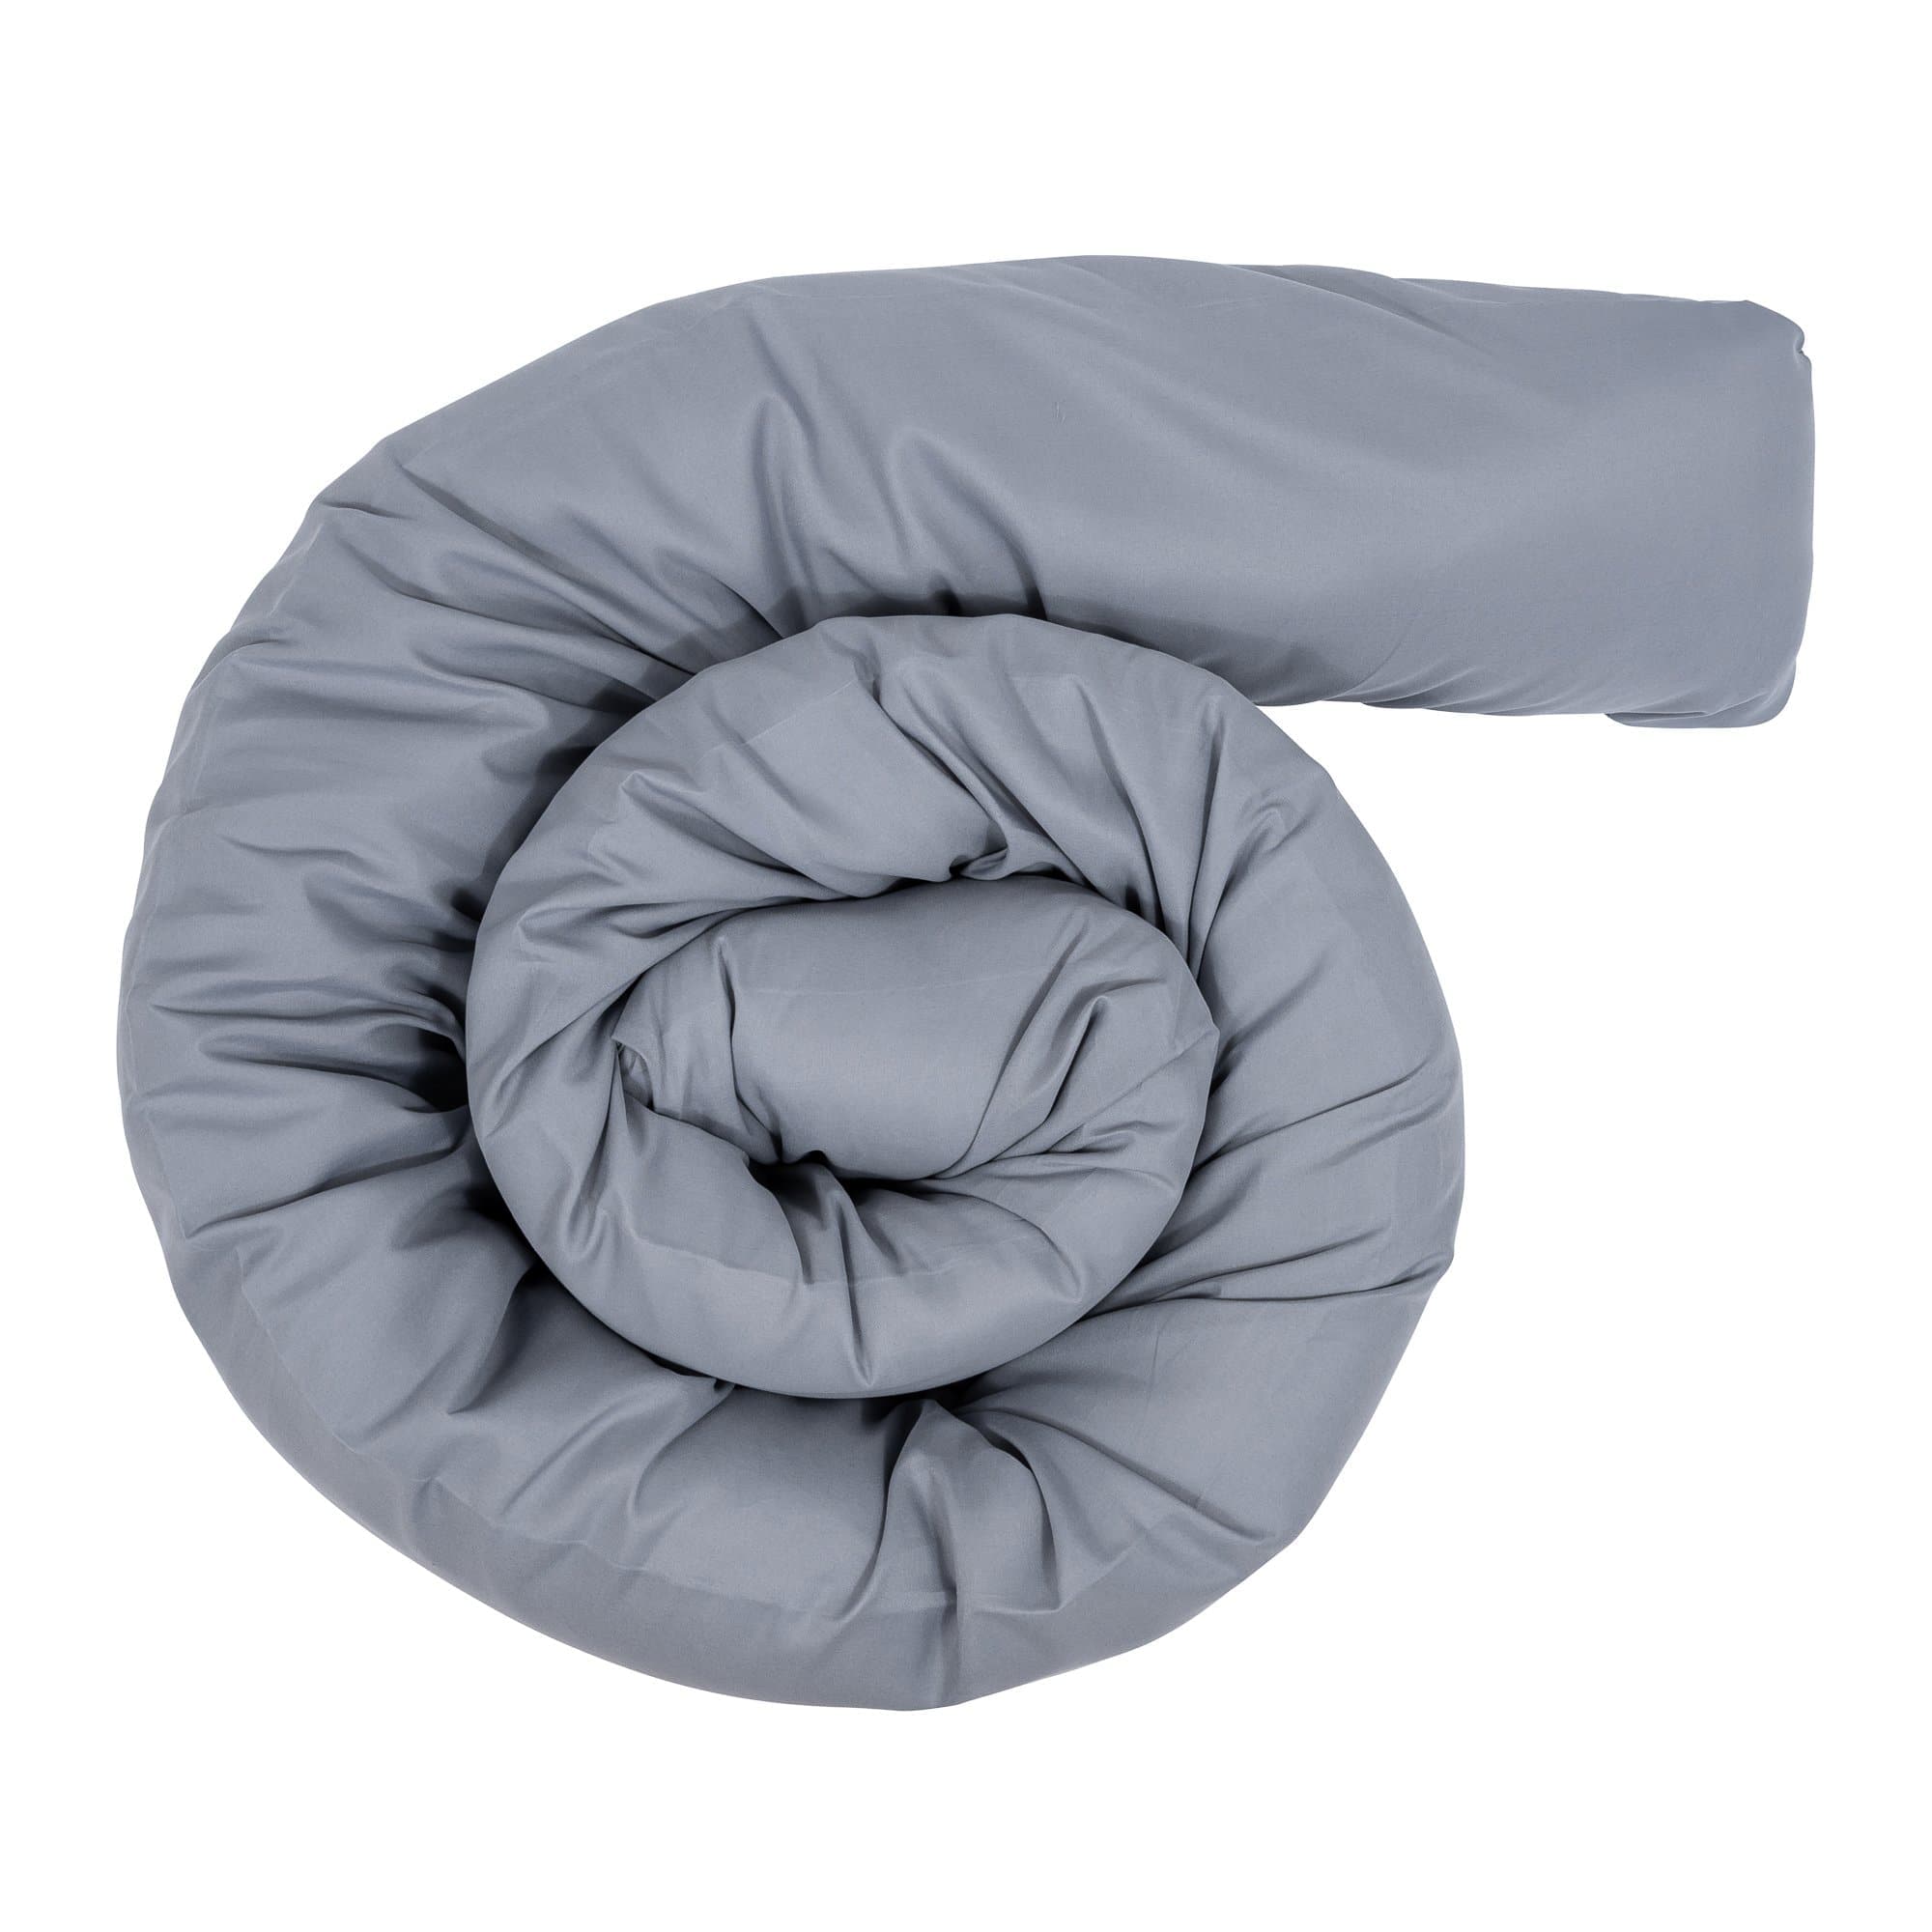 6 Ft Maternity Pillow And Case - Grey - For Your Little One